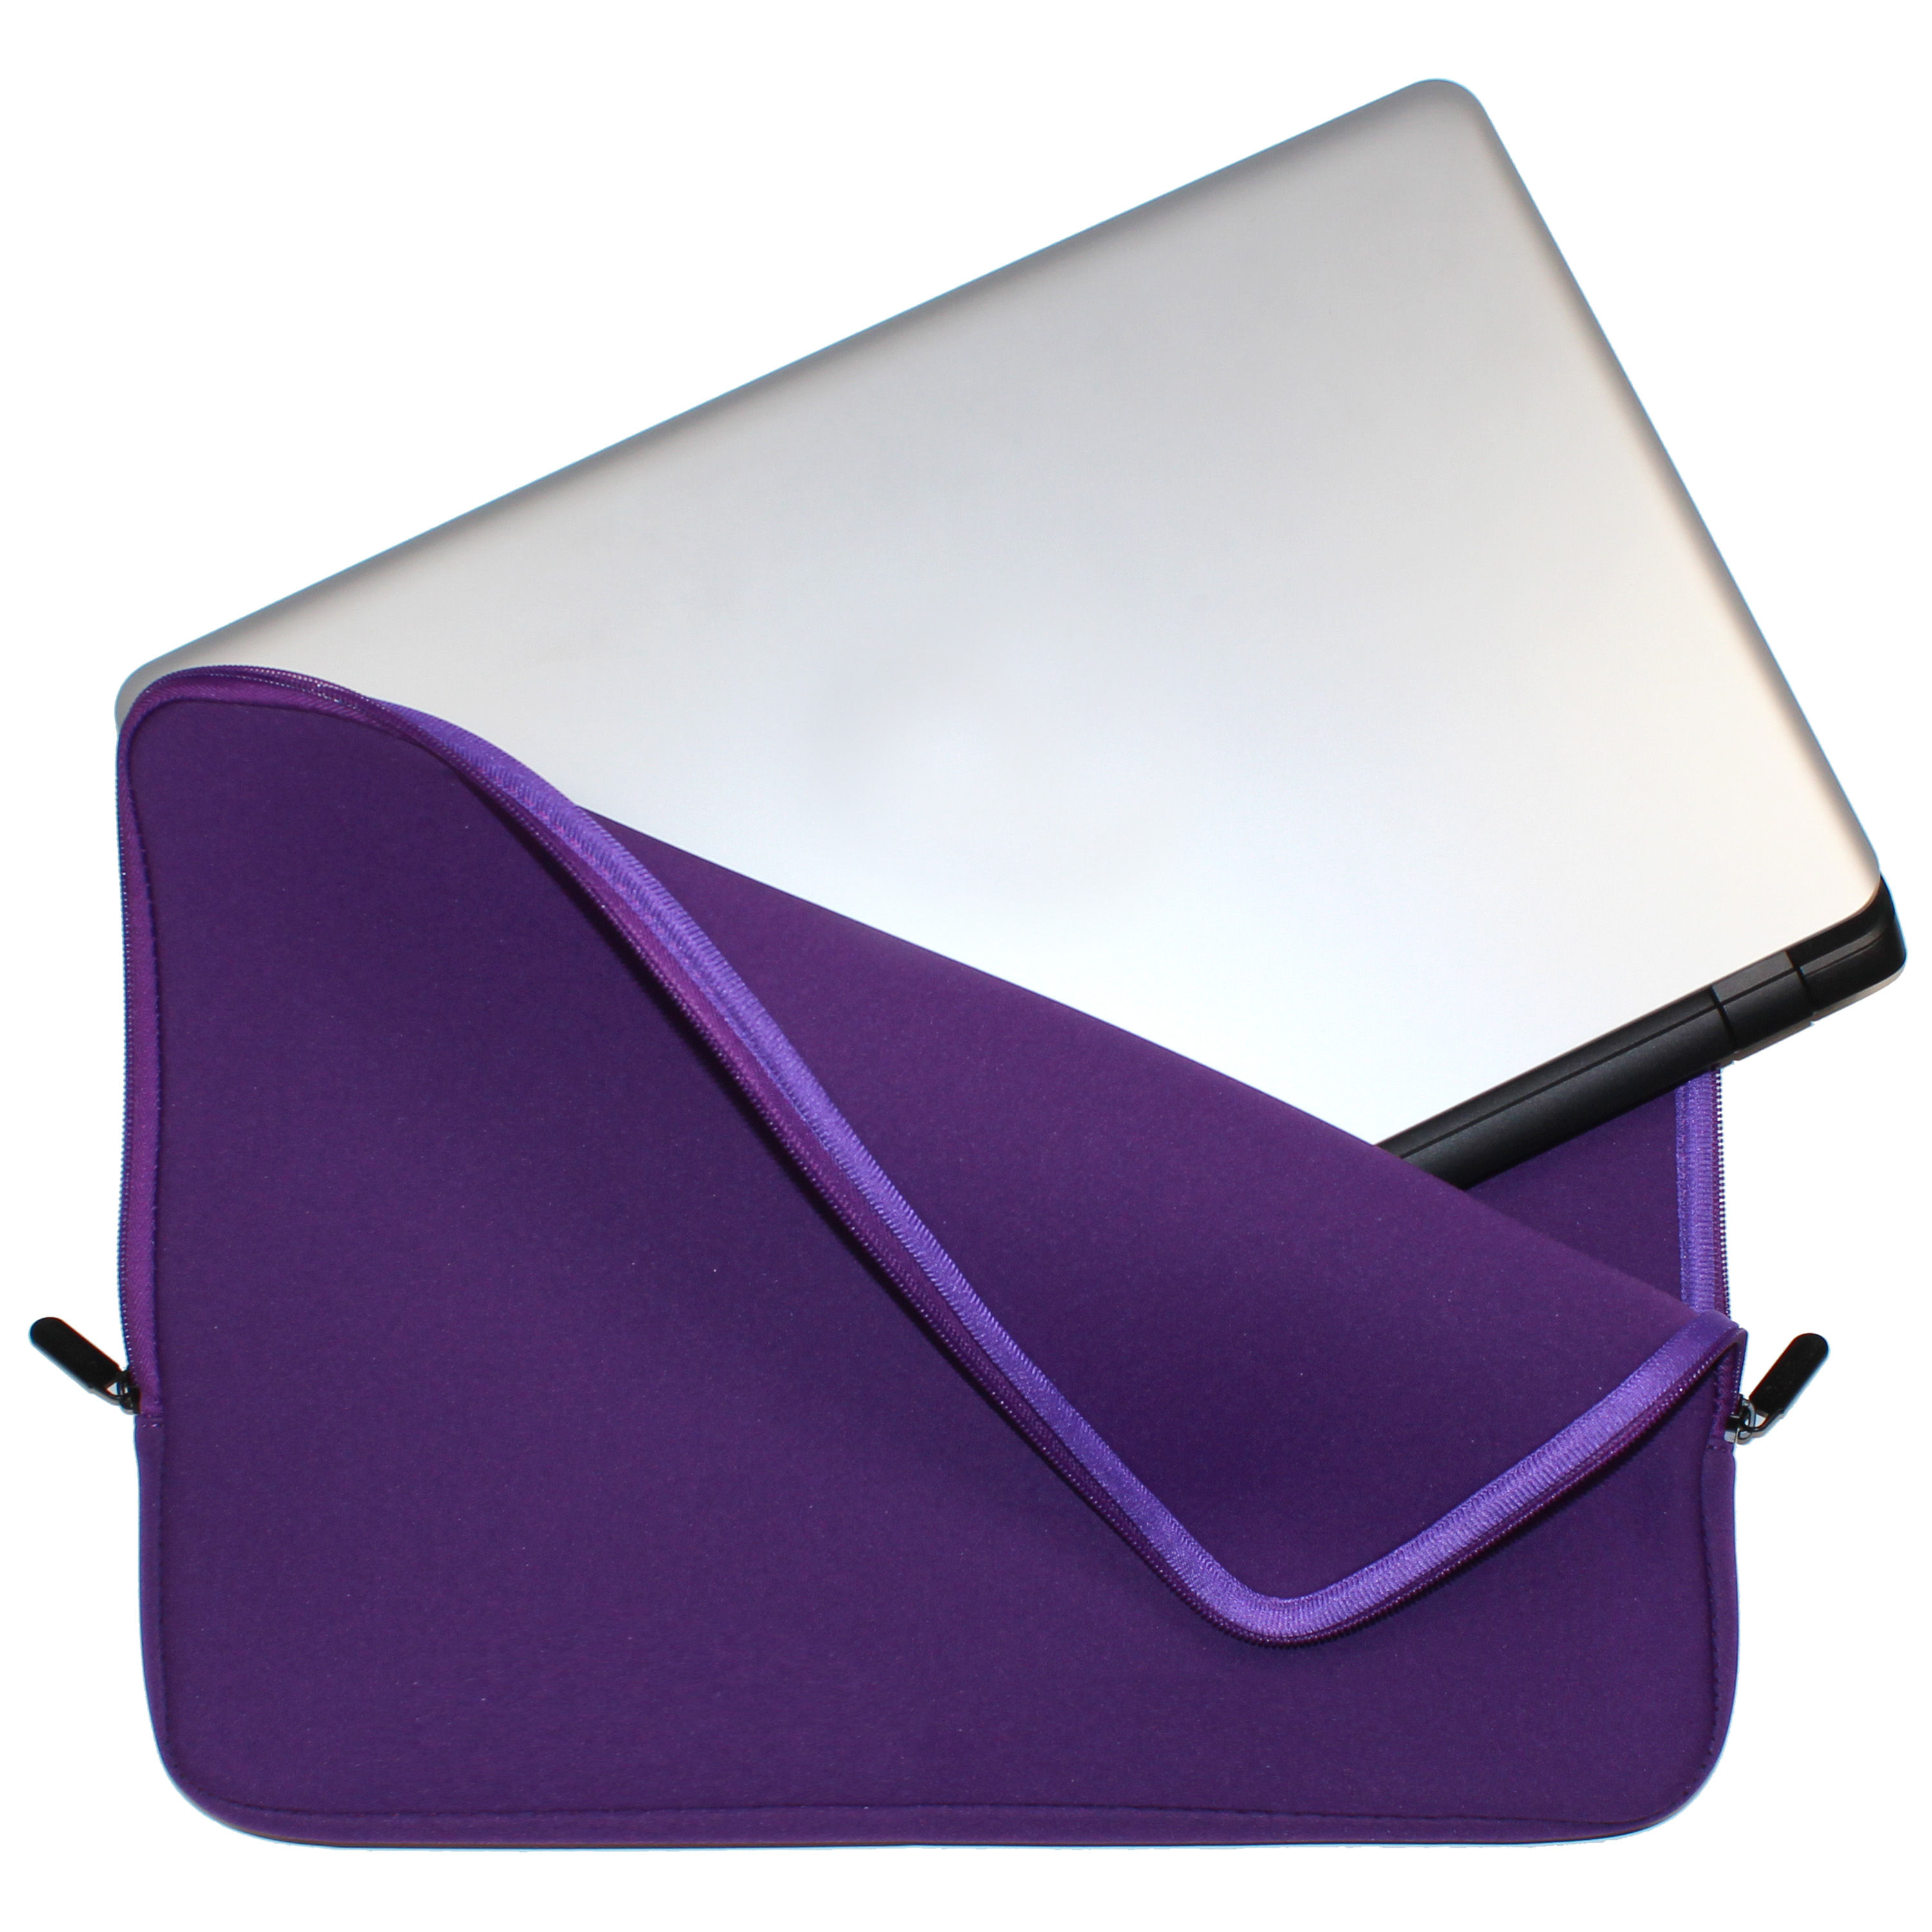 SlipIt 15.6" Laptop Sleeve with 1 Year Free GadgetTrak Subscription. A $19.95 value. - image 2 of 4